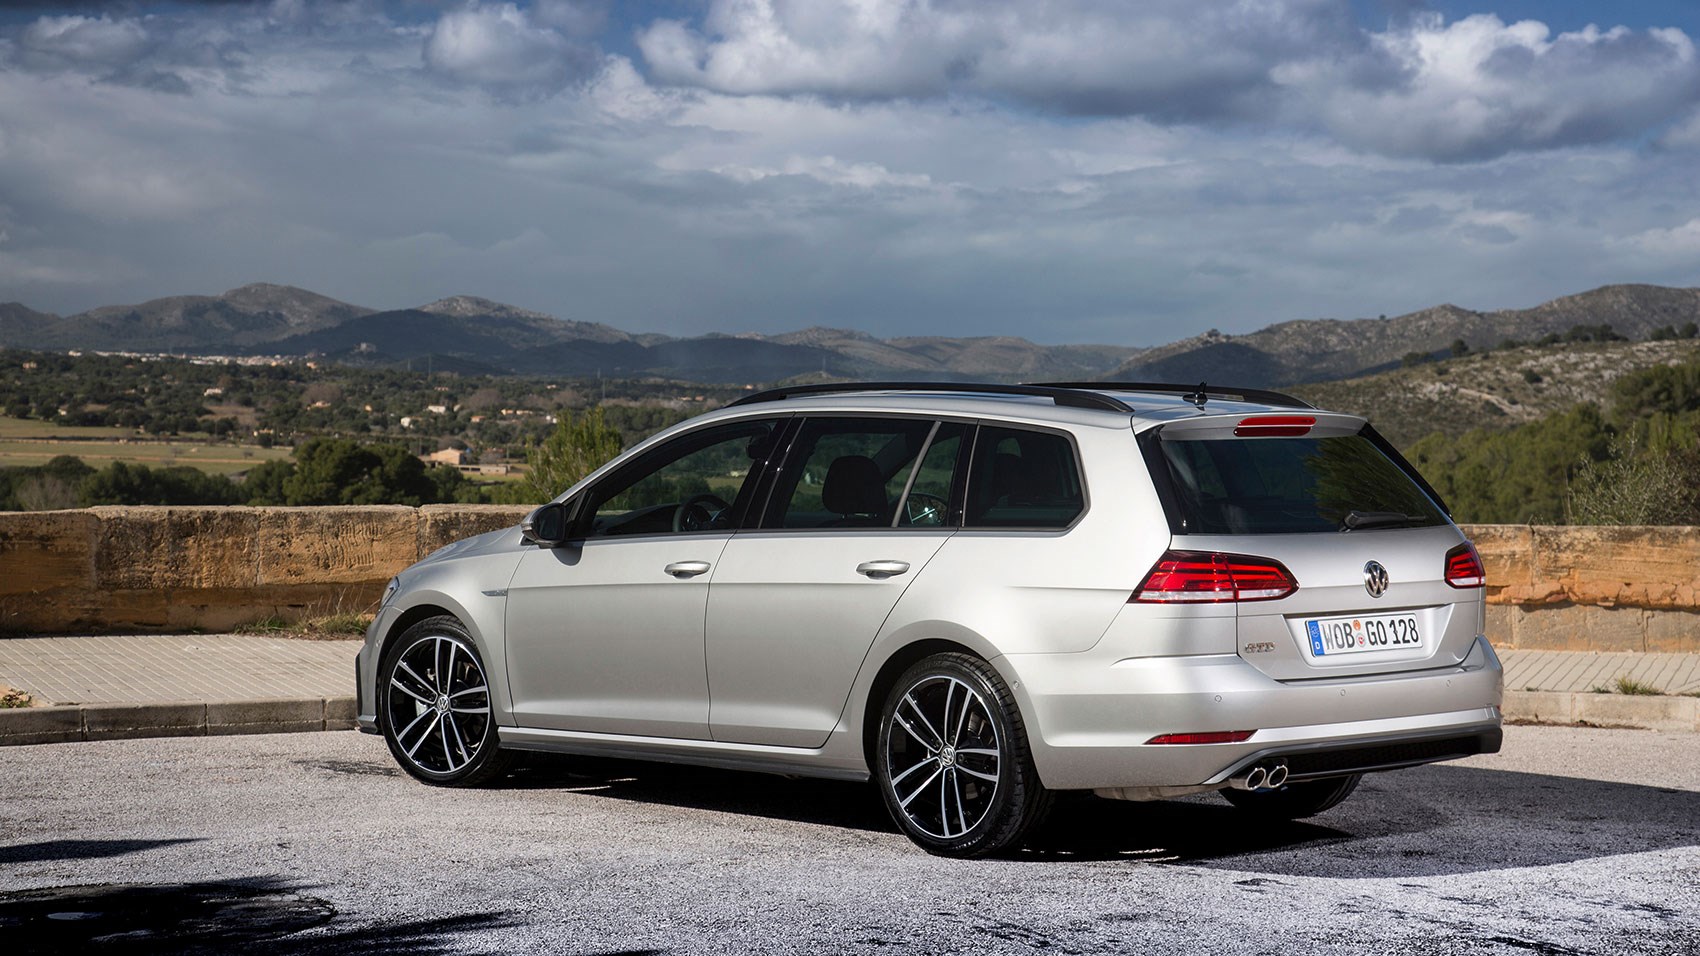 2016 VOLKSWAGEN GOLF R ESTATE For Sale By Auction In Oxted,, 55% OFF